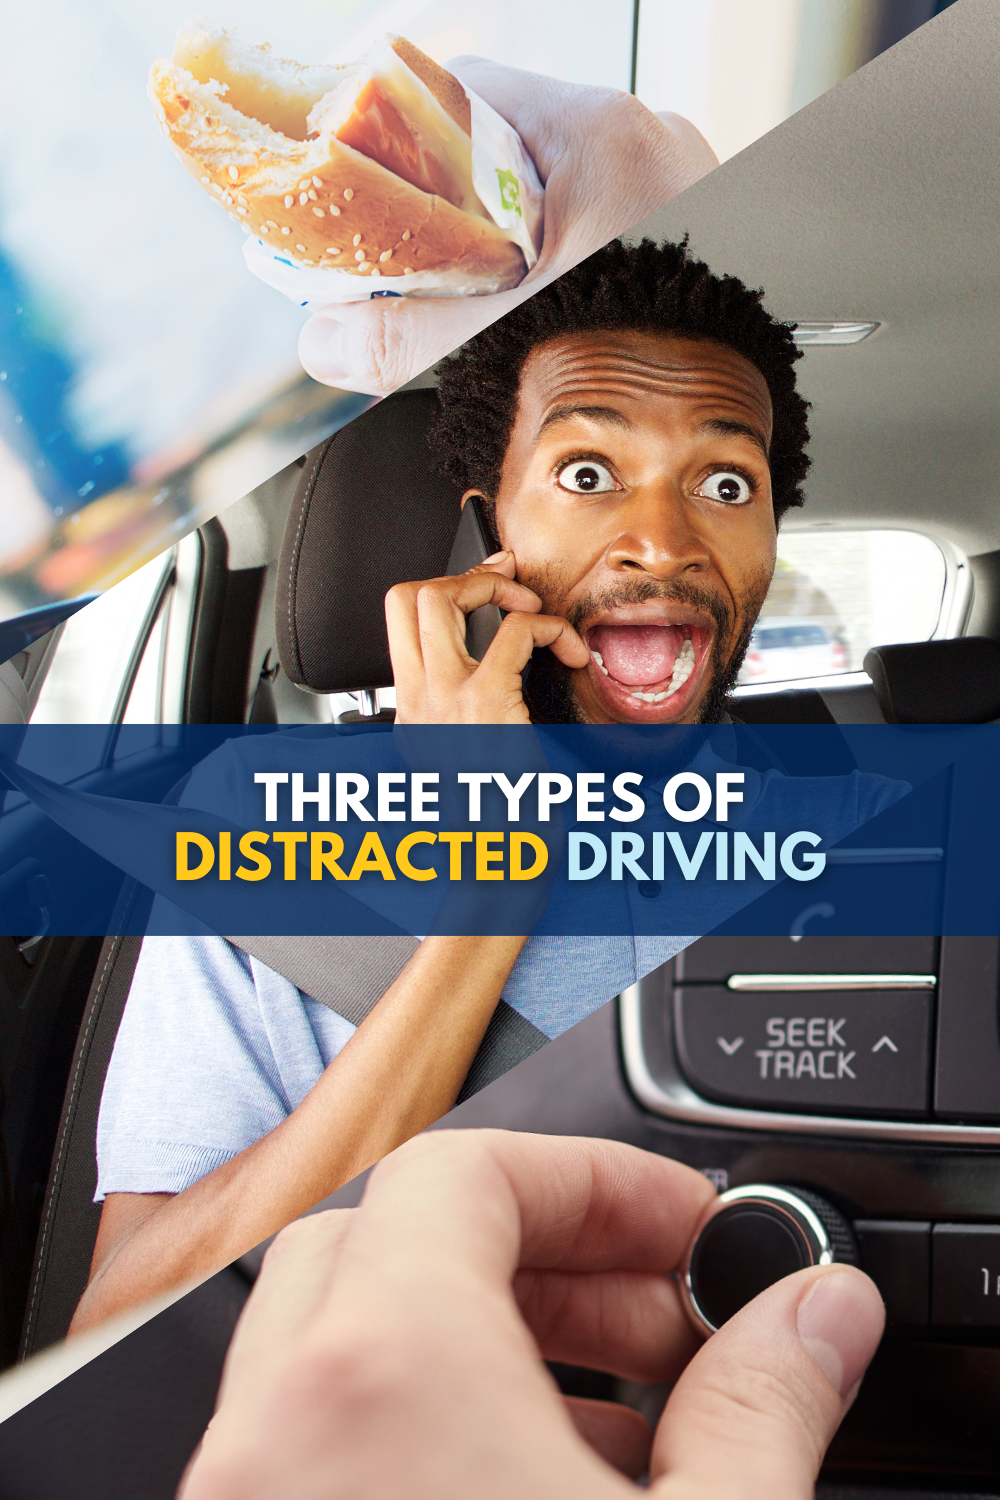 3 Types Of Distracted Driving: Visual, Cognitive And Manual